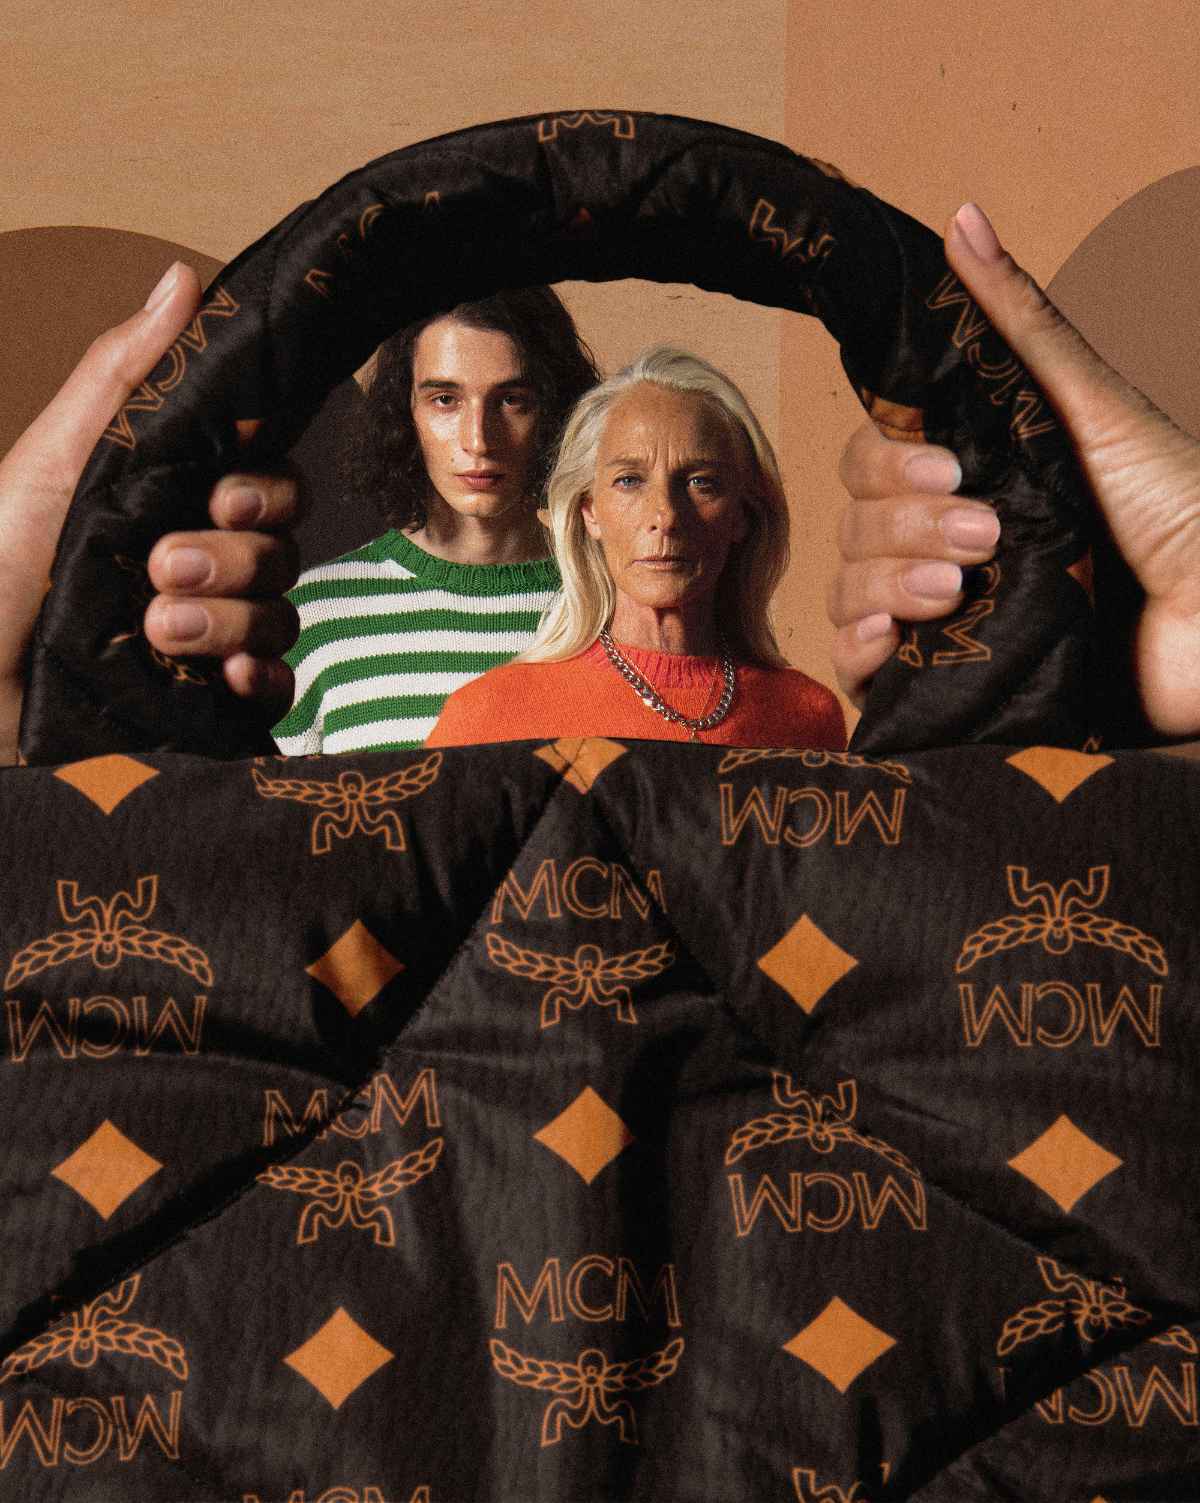 MCM Launches The New Collection Maxi Monogram With “Take Off” Campaign